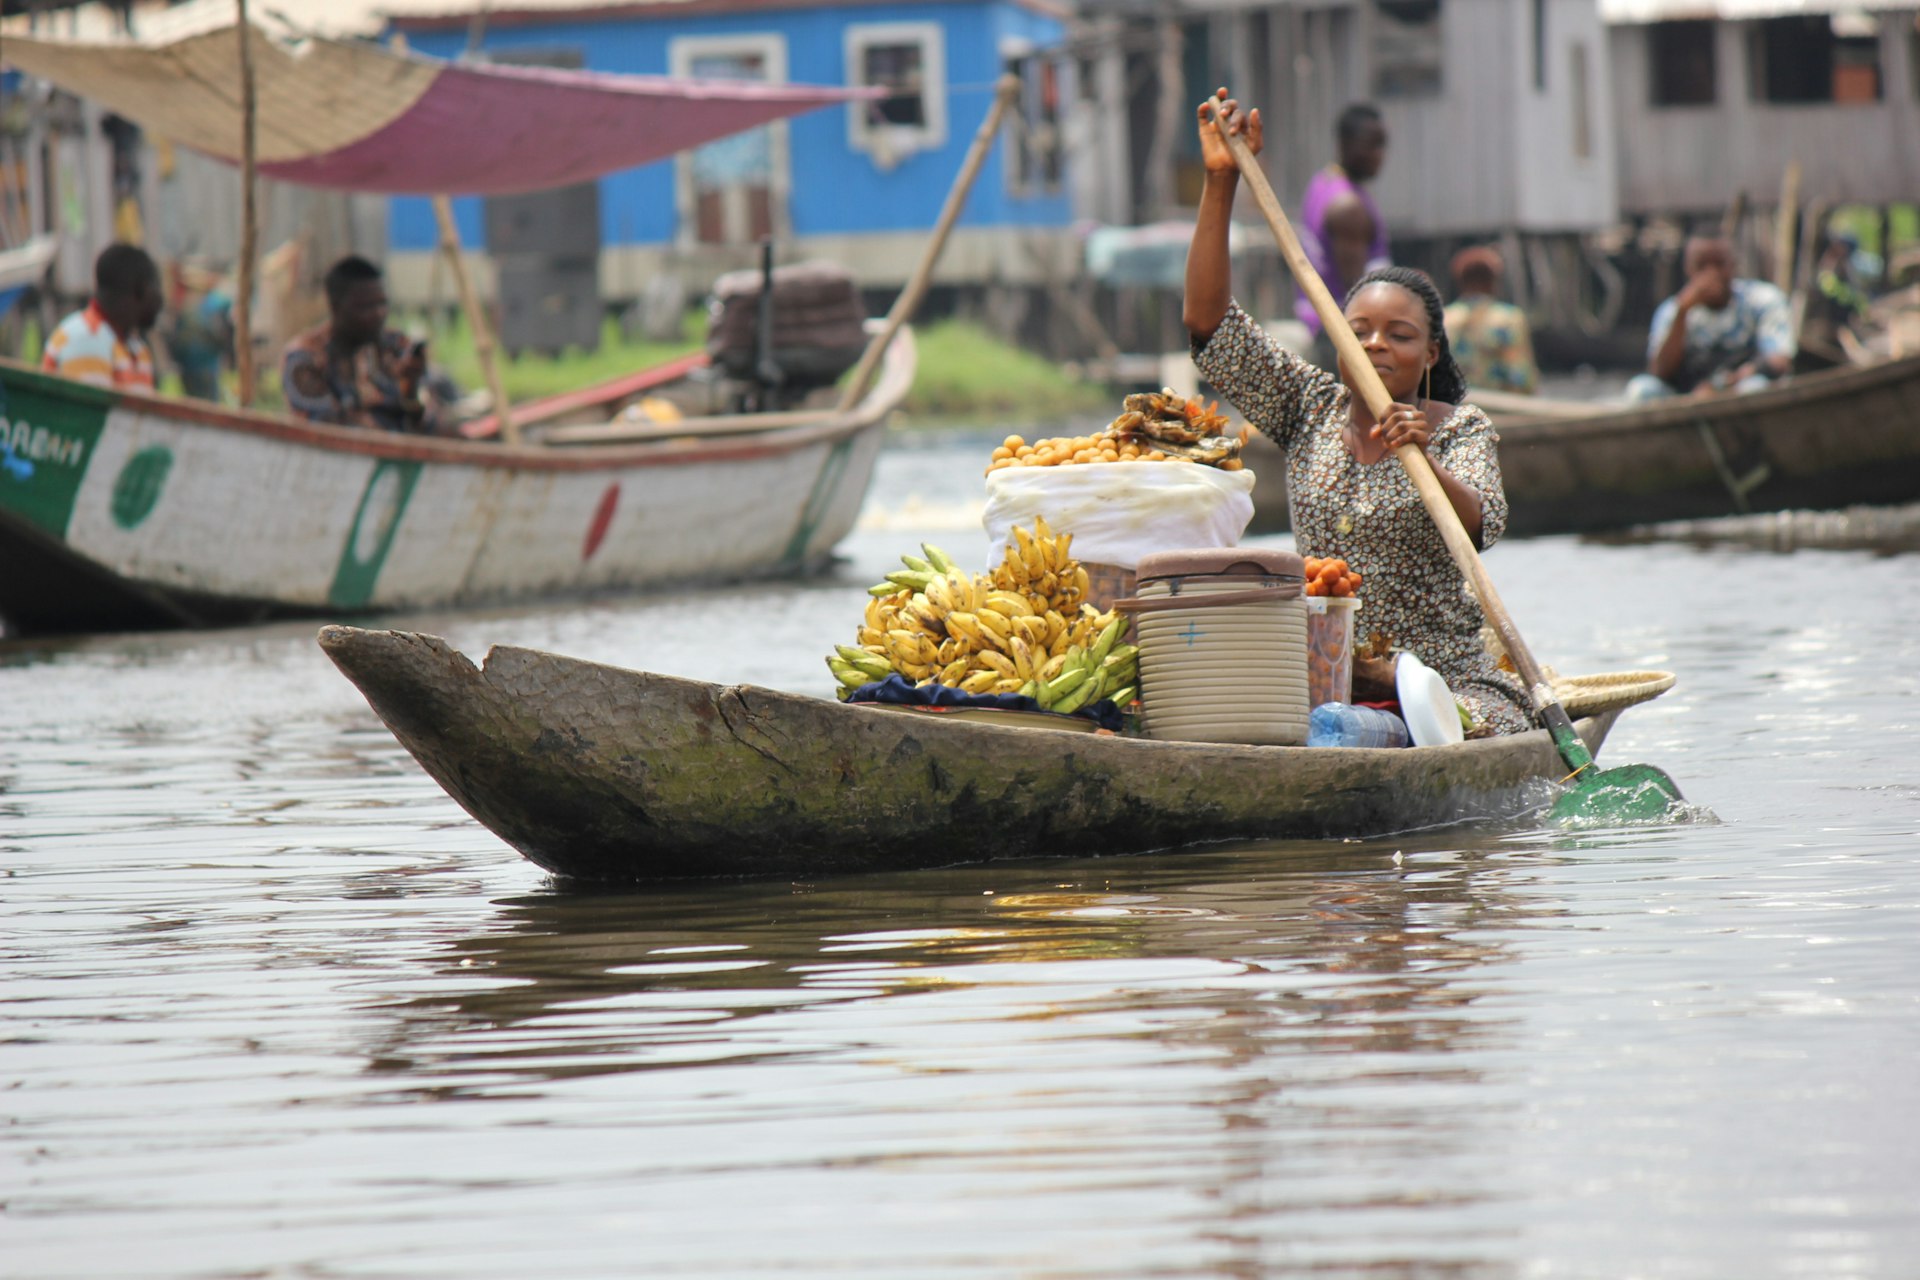 A woman rows a canoe filled with food in Ganvie, Benin